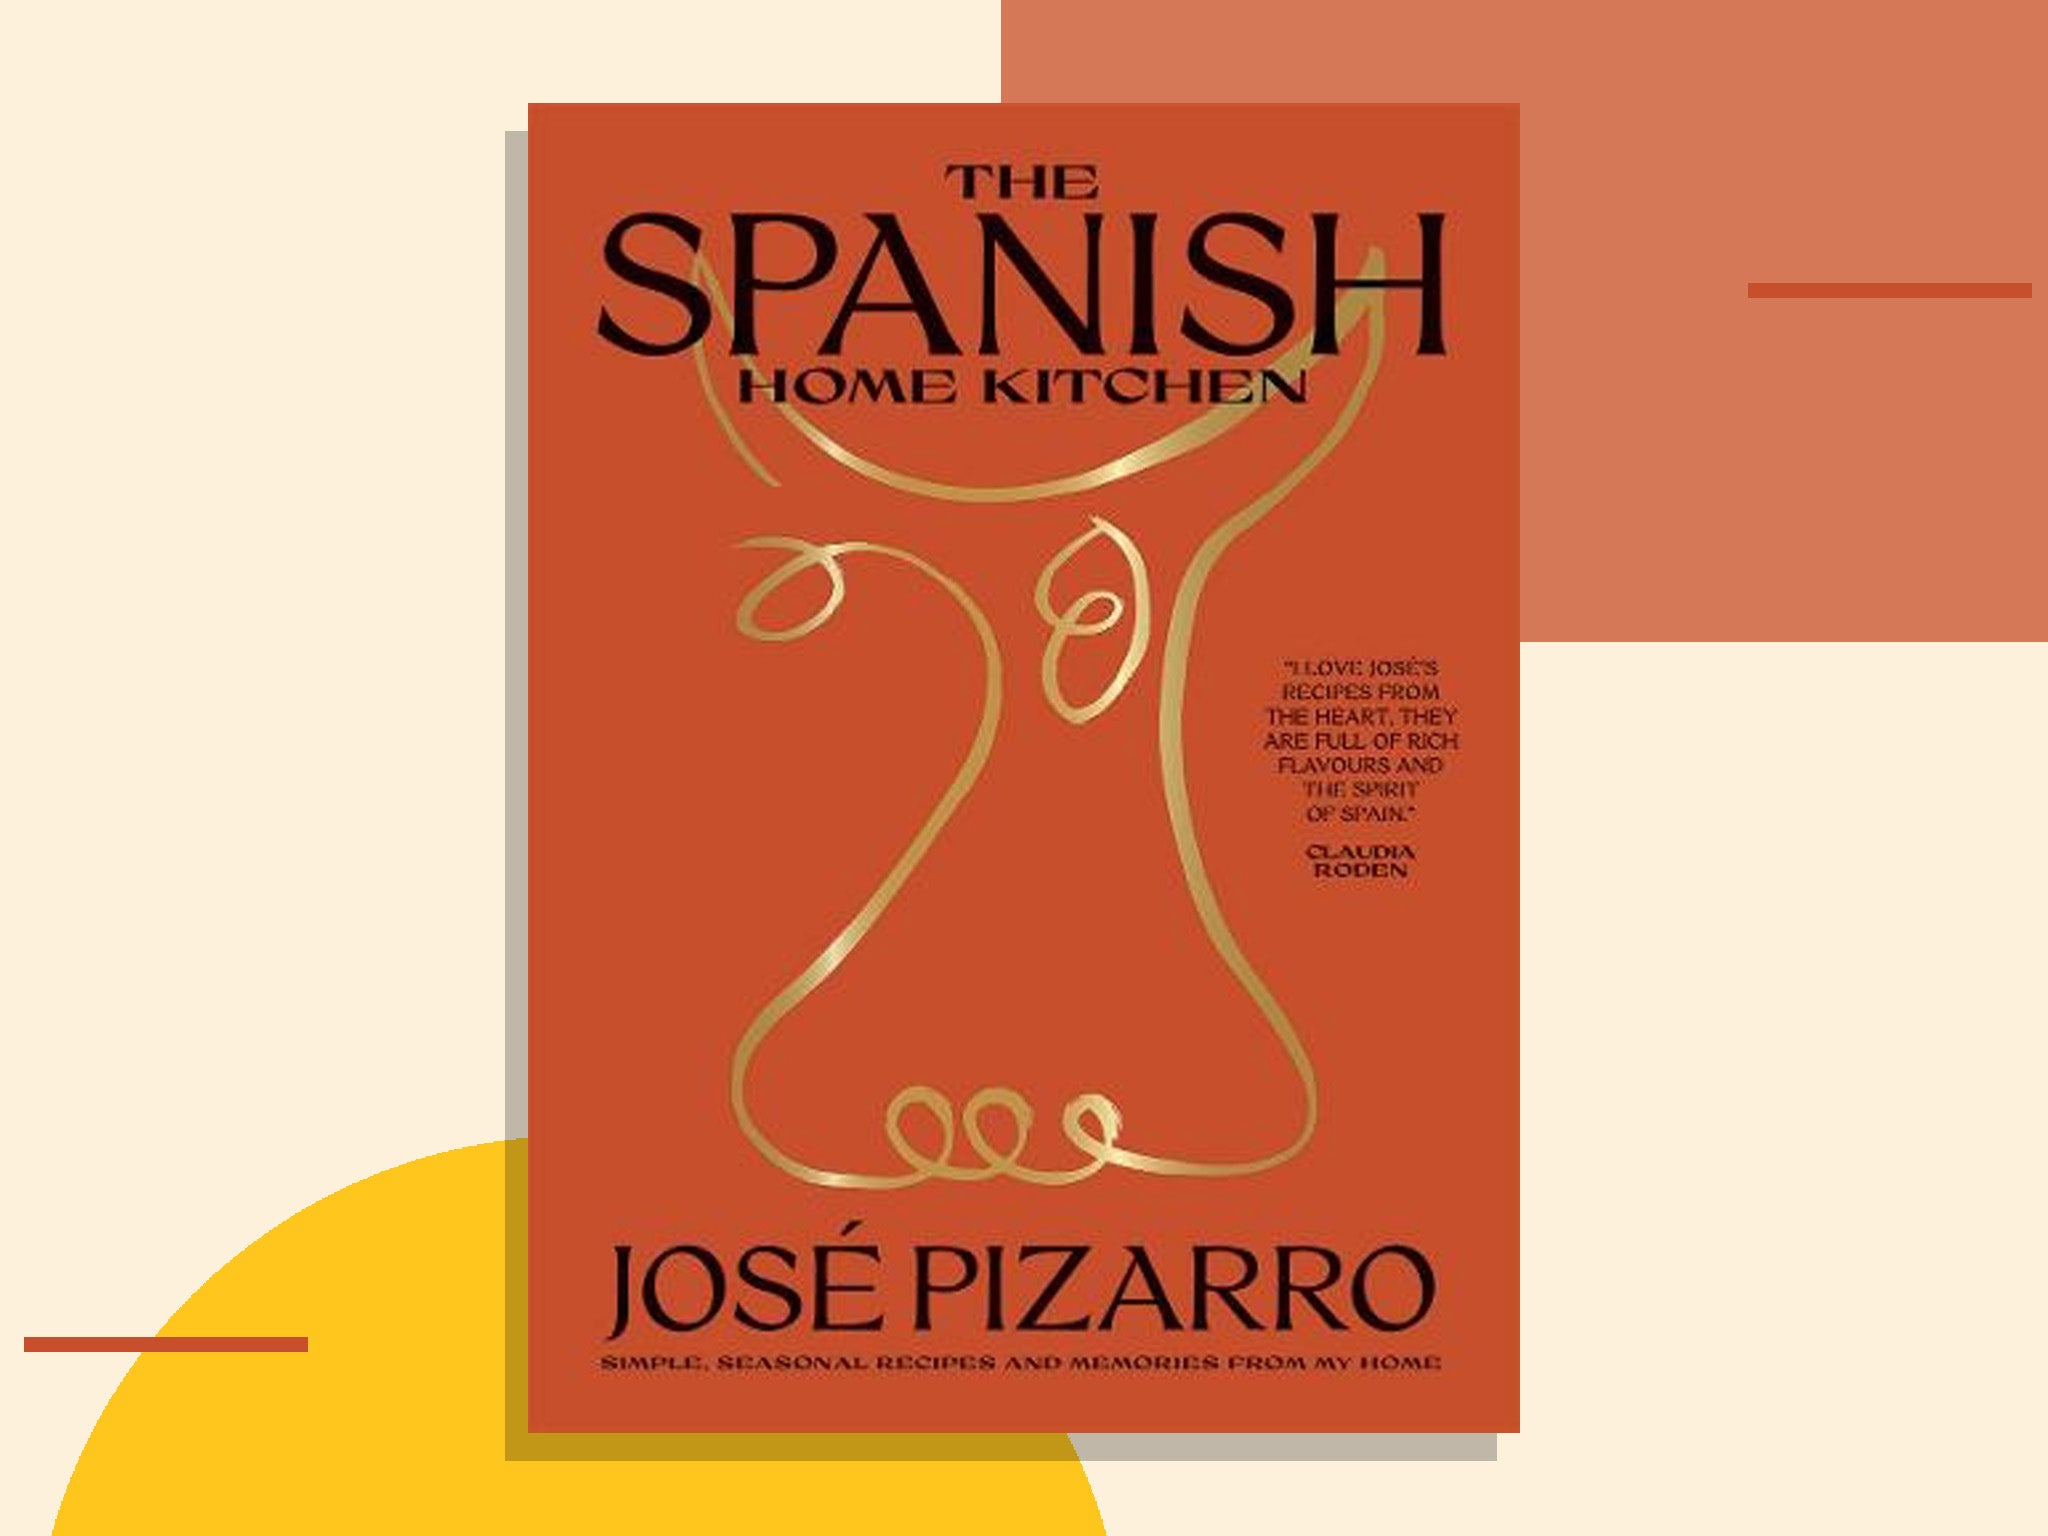 https://static.independent.co.uk/2022/06/30/14/The%20Spanish%20Home%20Kitchen%20Book%20copy.jpg